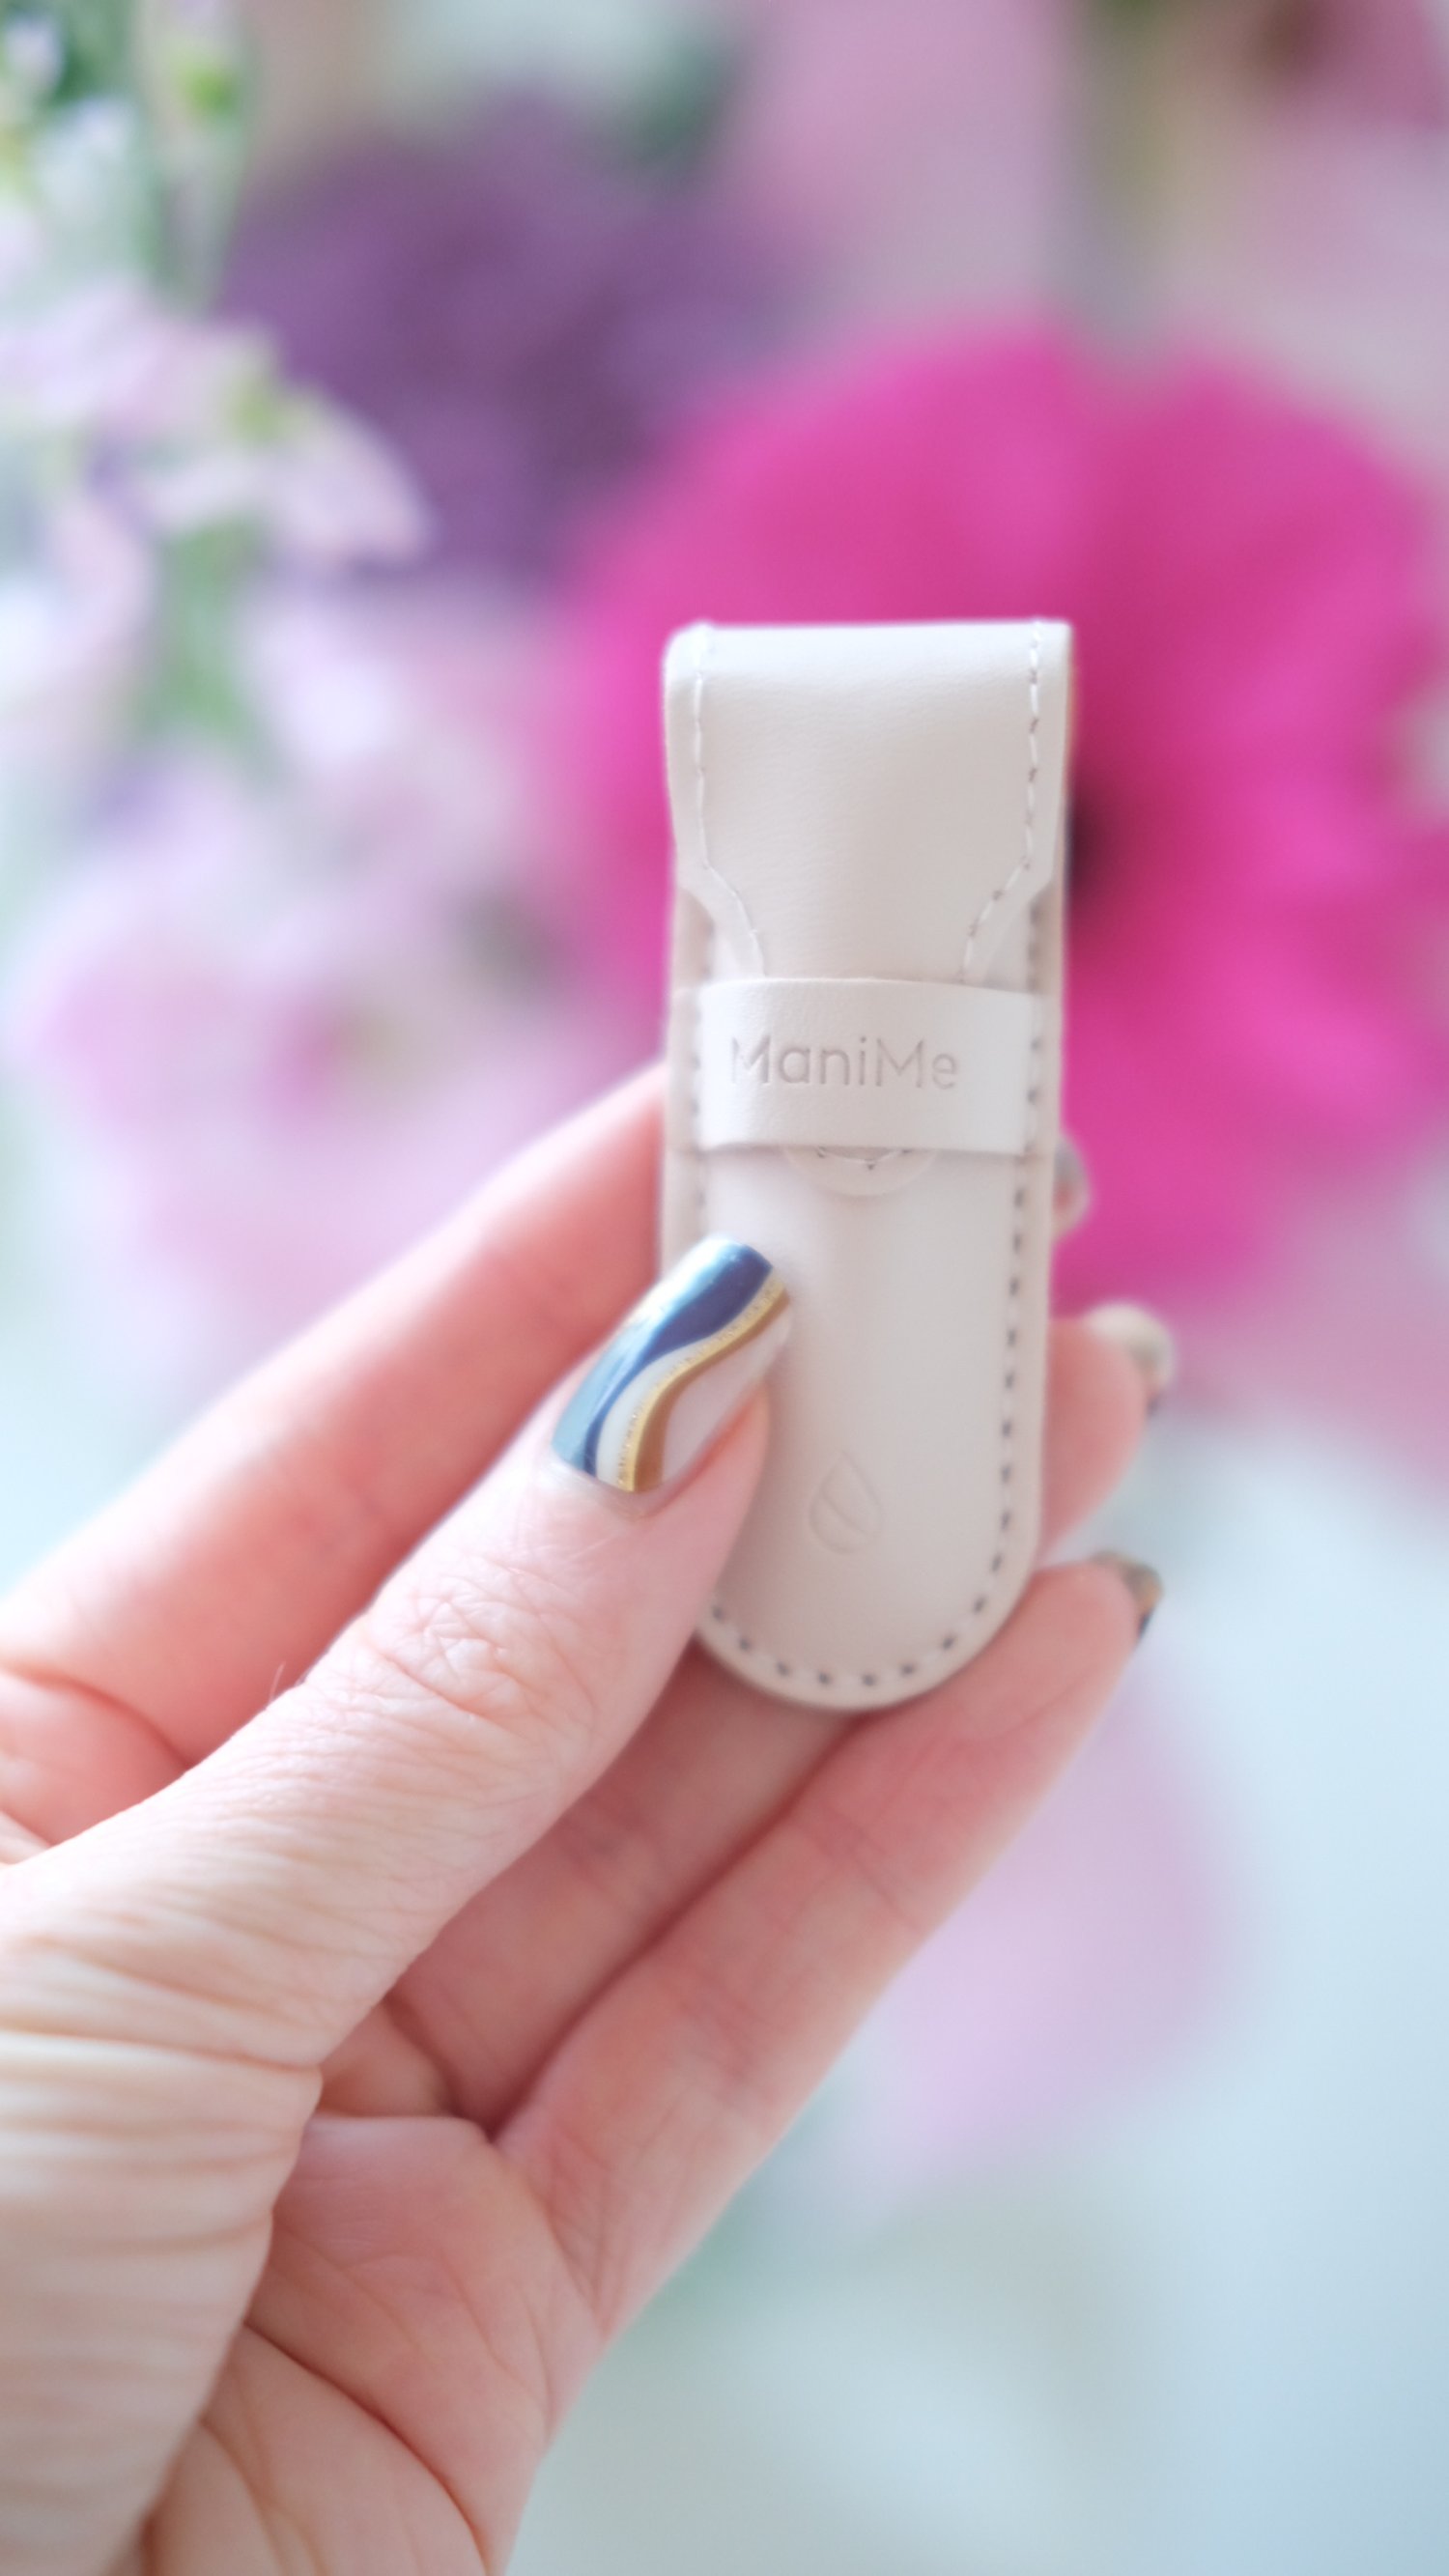 ManiMe discount code that can be used for 20% off your first purchase of ManiMe nails. These are the best gel stick on nails that I have tried. I have now had 15 pairs of ManiMe nails so am ready to tell you everything you need to know about ManiMe n